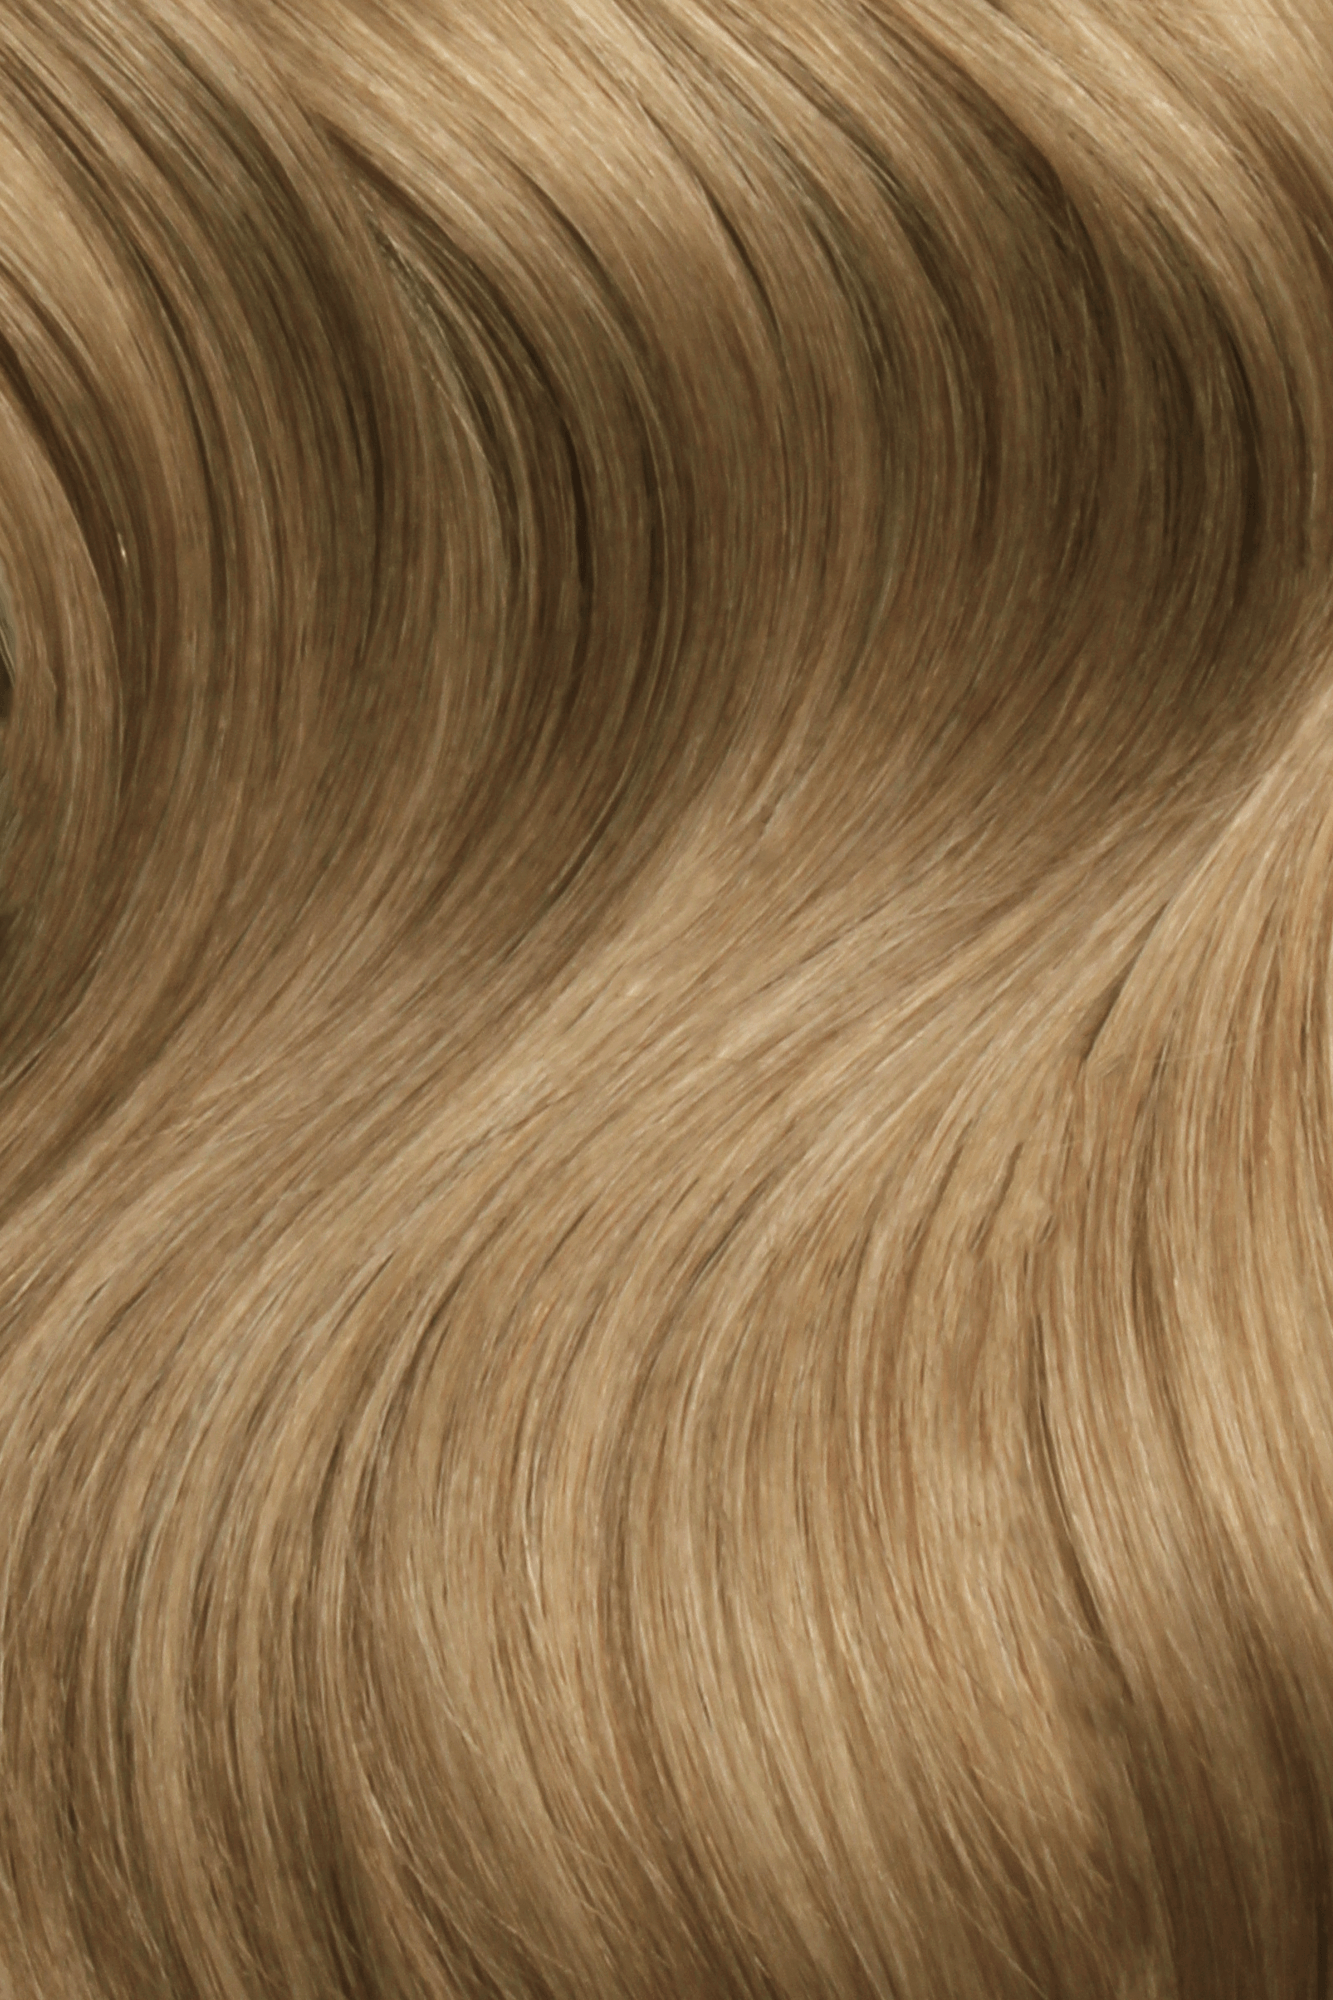 SEAMLESS® Tapes 18 Inches - SWAY Hair Extensions Champagne-Chestnut-8-22 clip-in hair extensions made of 100% Double Drawn, Remy Human Hair. SWAY SEAMLESS® Tapes, 18 inches. Lightweight, flexible, and perfect for any hairstyle.